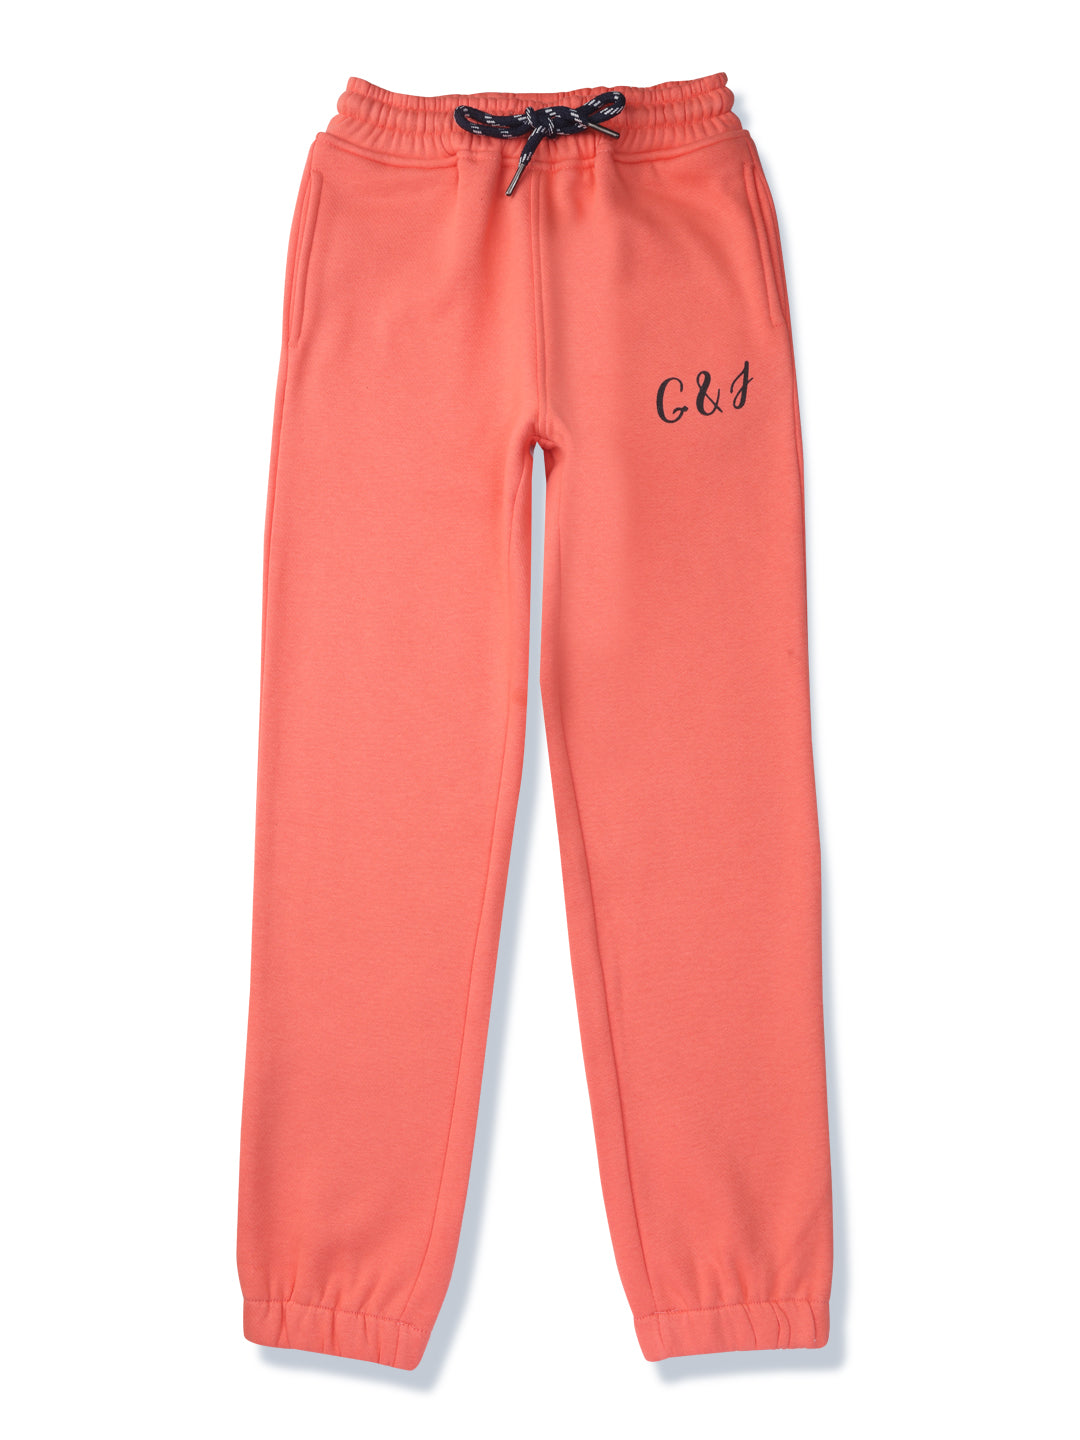 Girls Pink Solid Cotton Track Pant